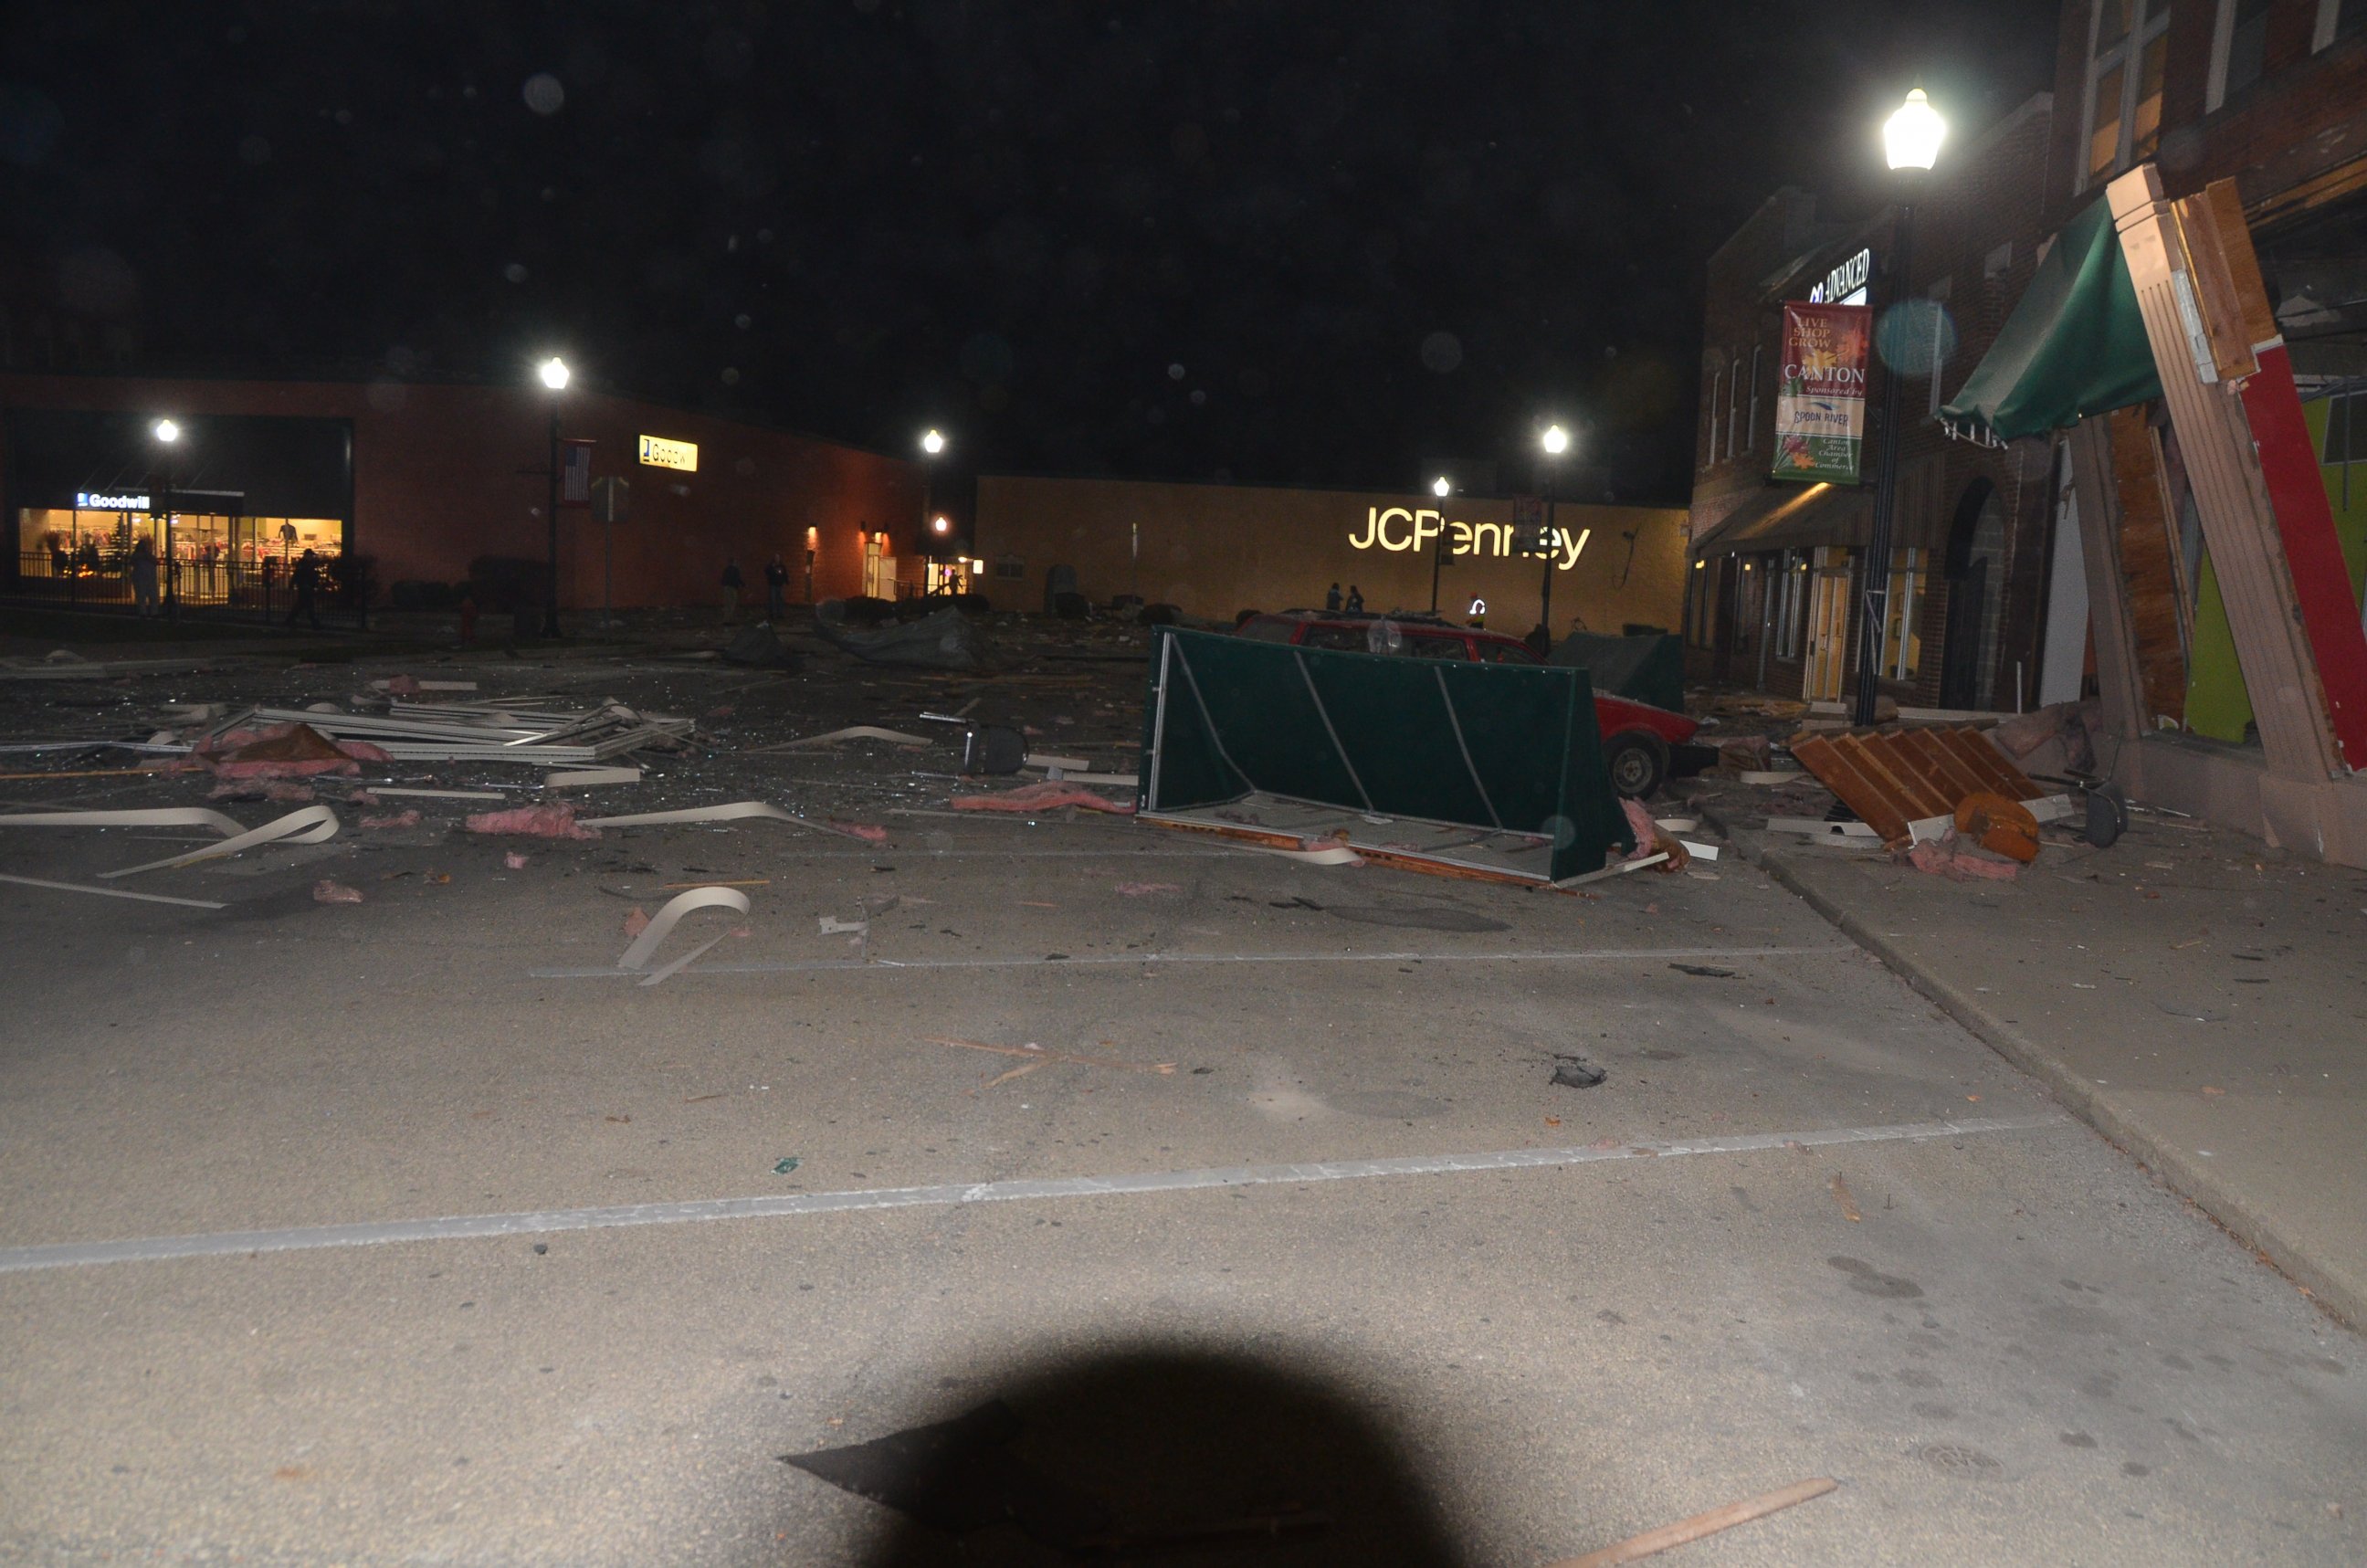 PHOTO: Shops in Canton, Illinois, show damage after a possible gas explosion on November 16, 2016.